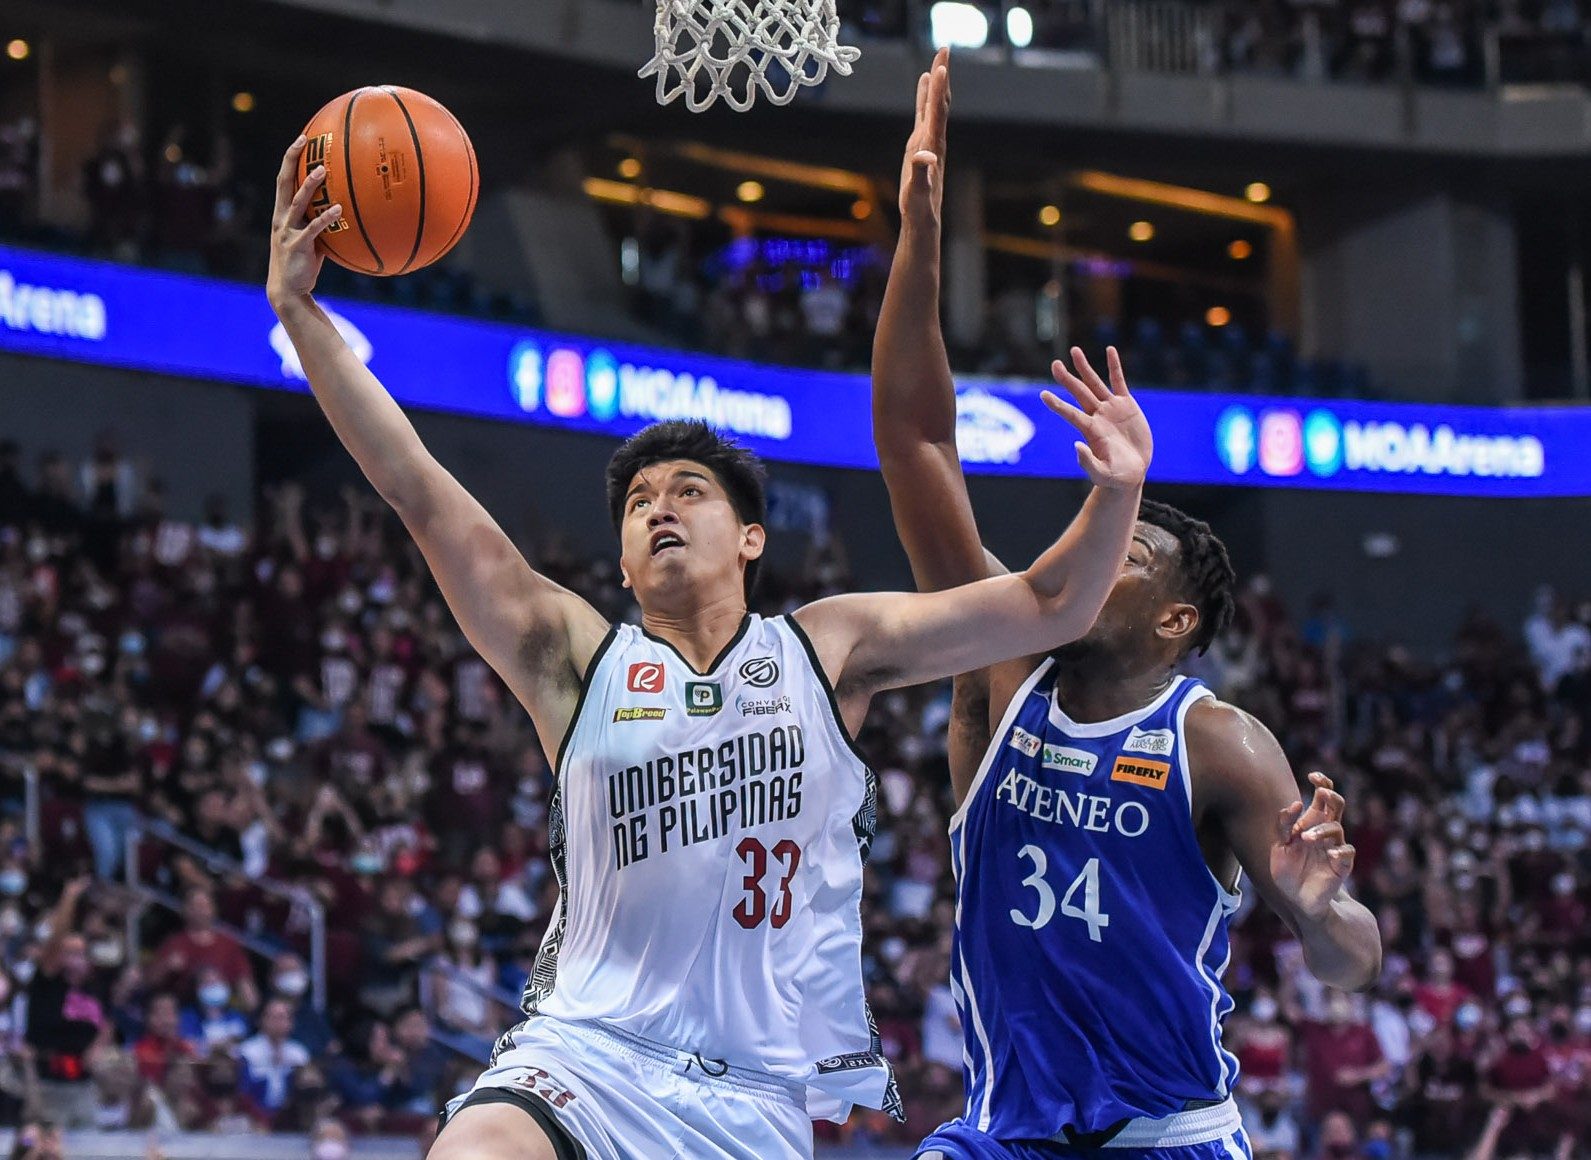 History within grasp of UP Fighting Maroons